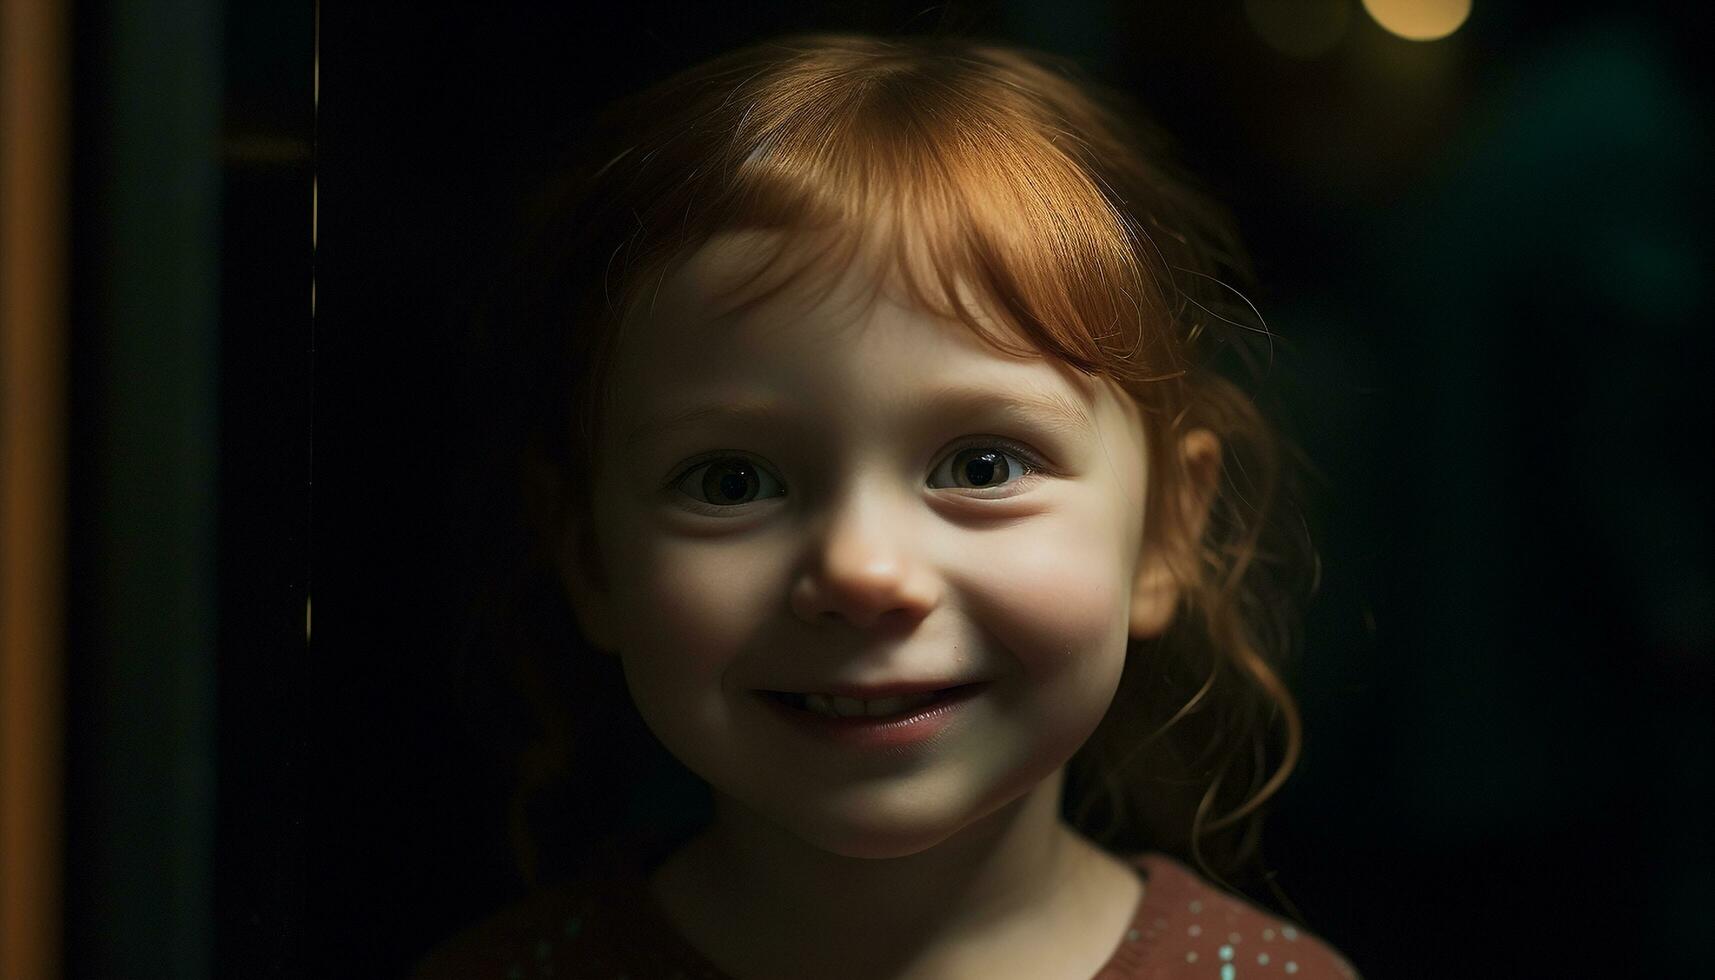 A cute, smiling child looking at camera with innocence and joy generated by AI photo